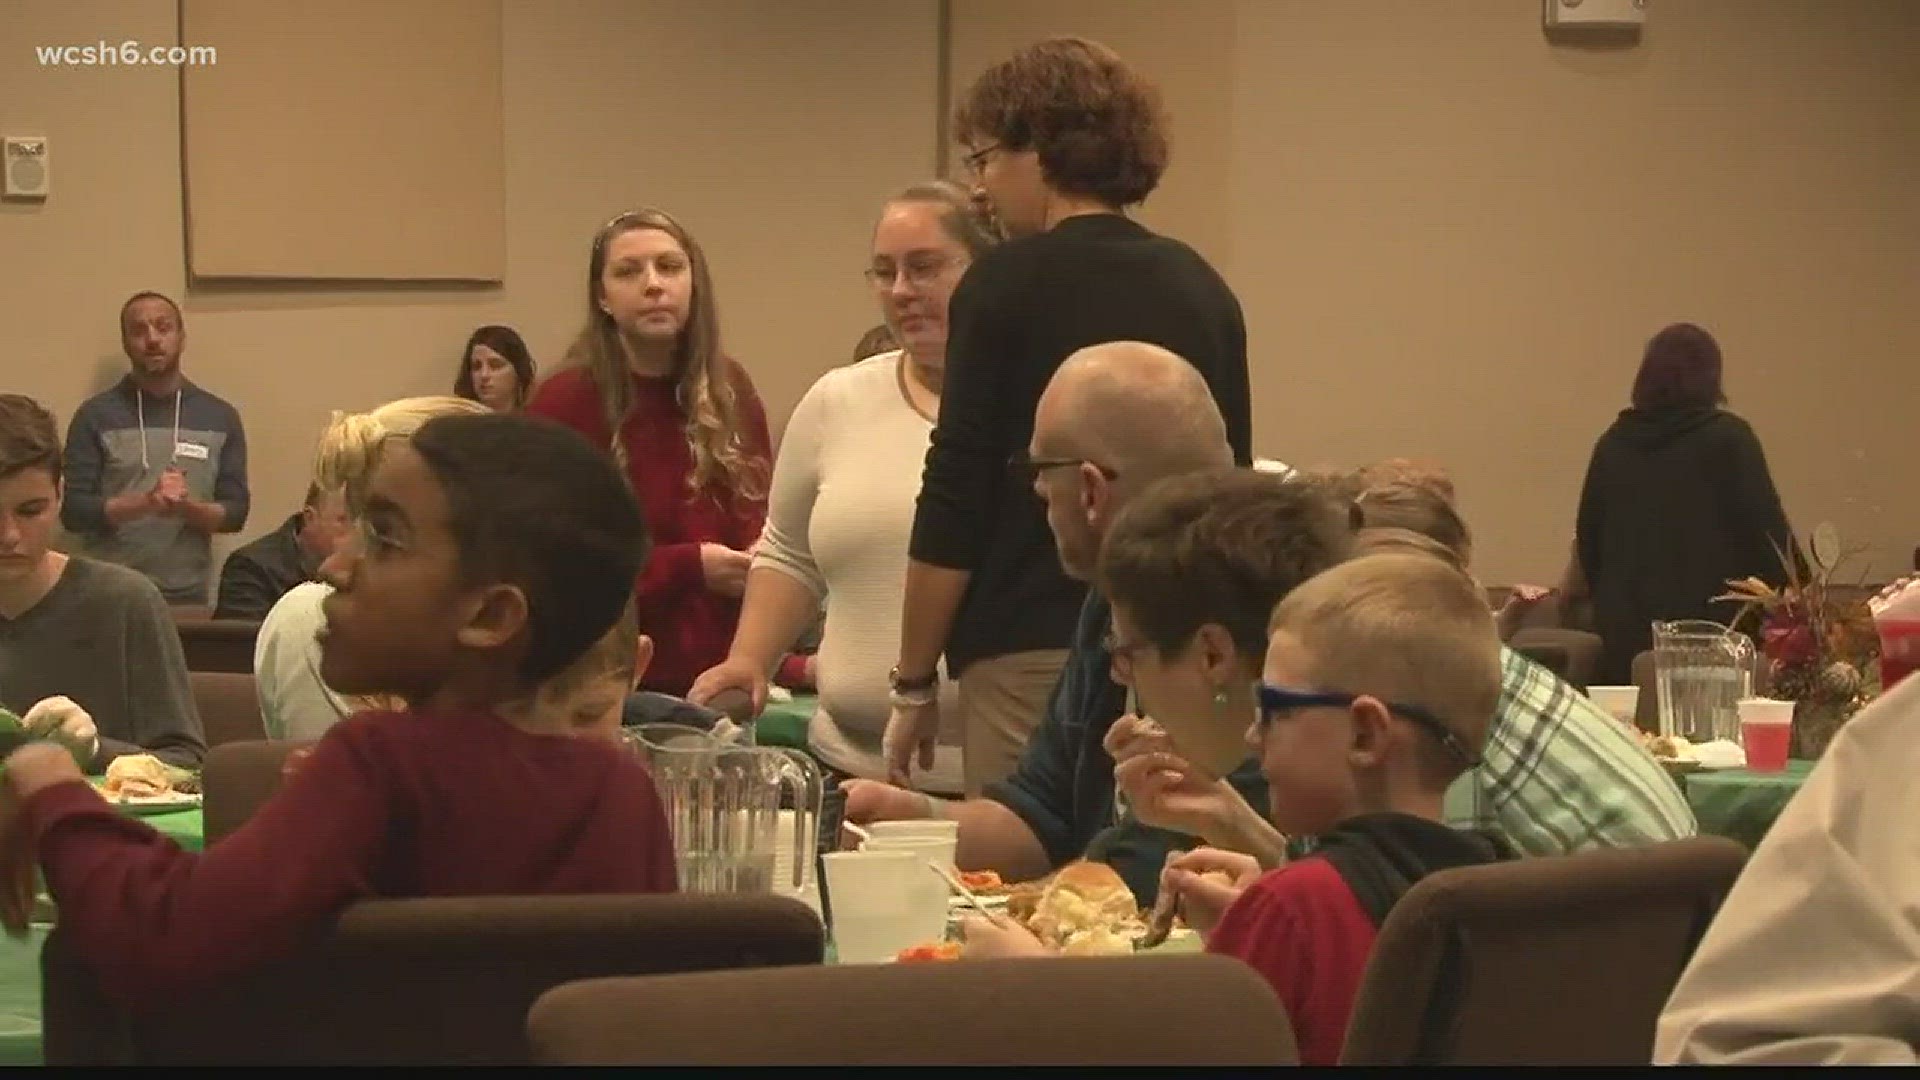 Rock Church Serves Up Thanksgiving Dinner In Bangor for Over 300 People